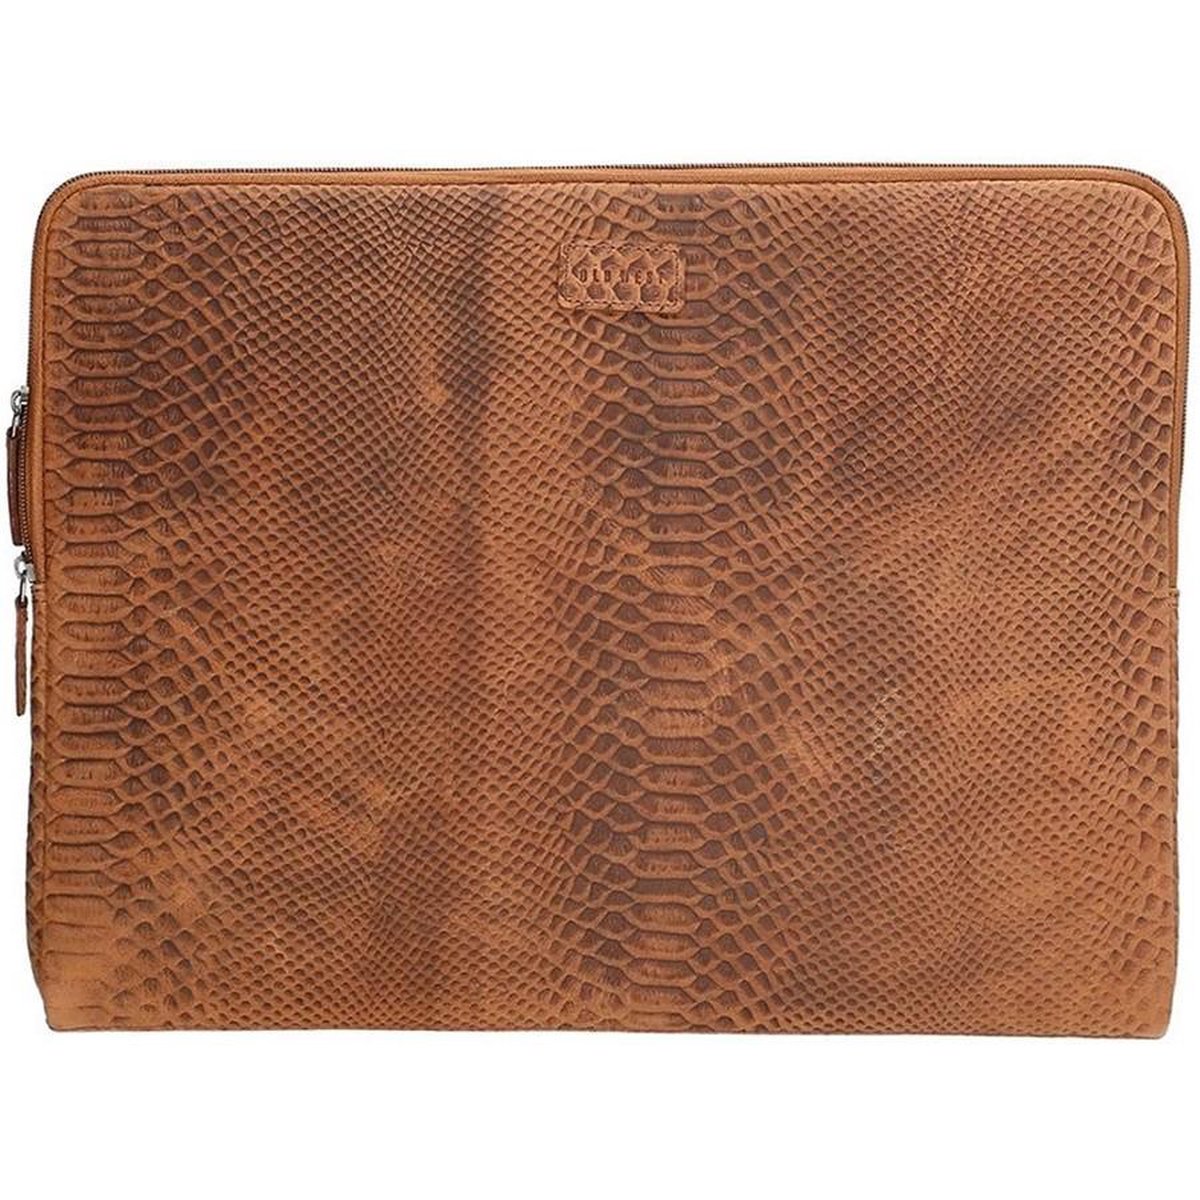 Old West San Angelo - Laptopcover / Laptopsleeve - 15 inch - bruin